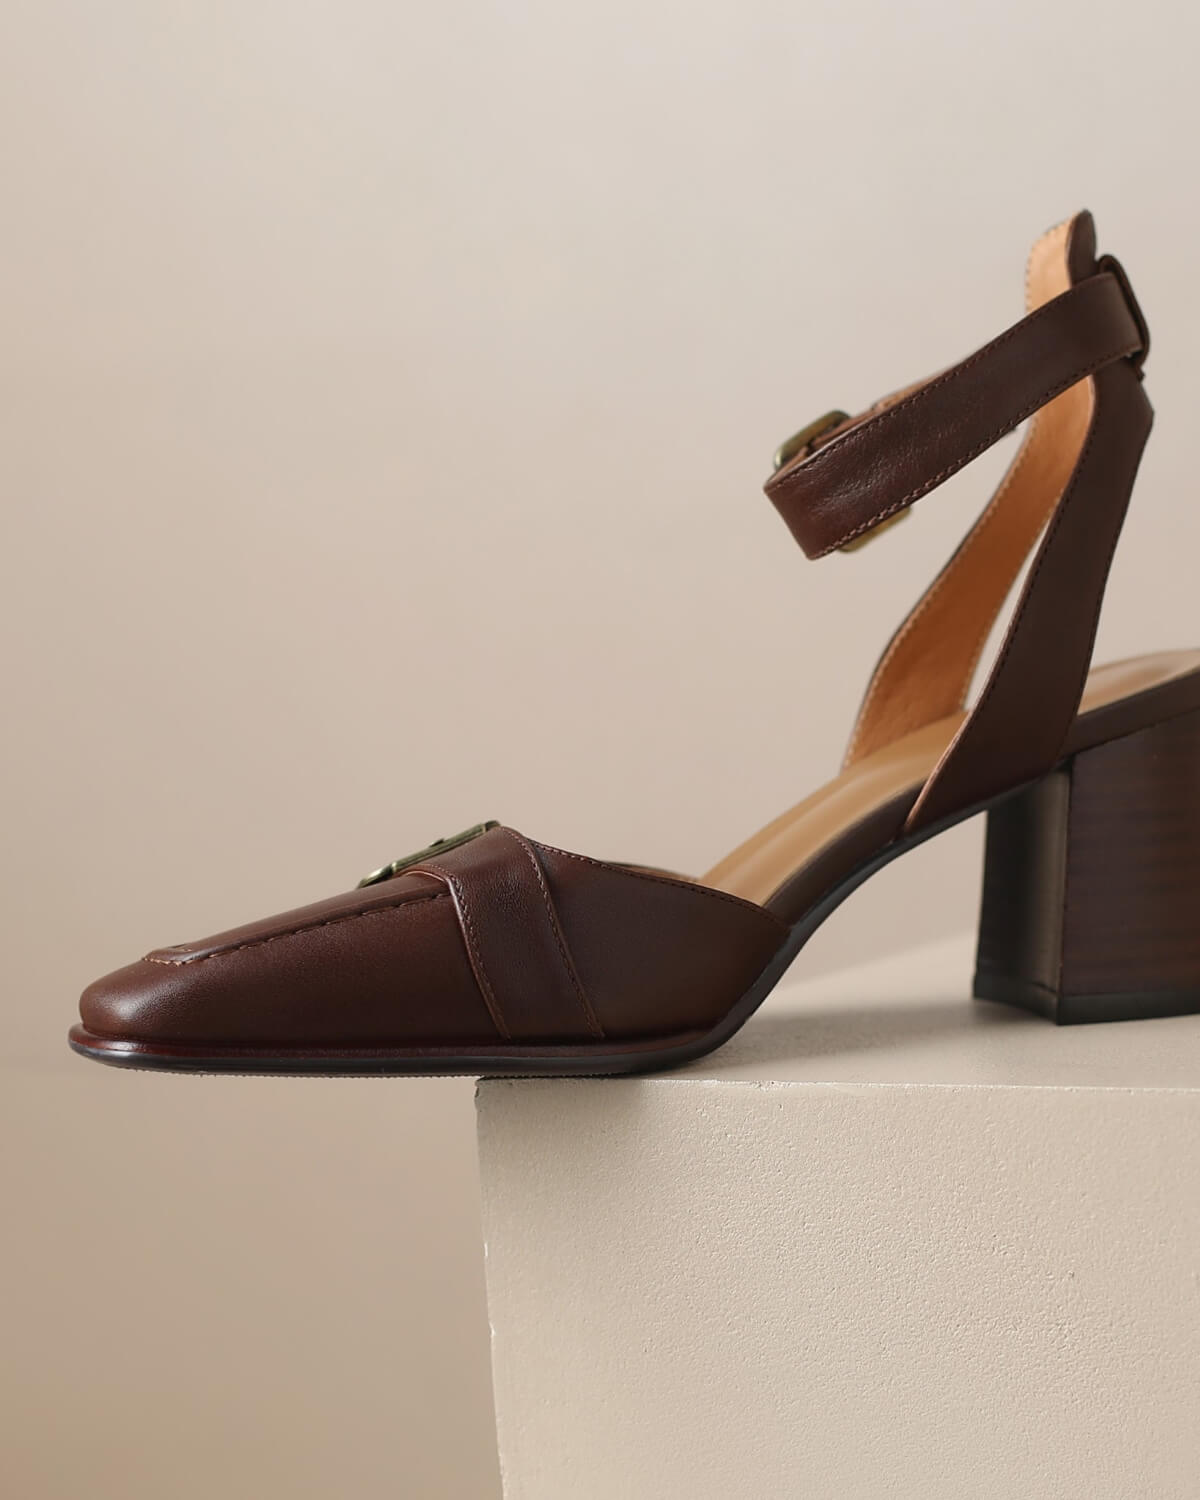 Lando-Square-Toe-Ankle-Strap-Brown-Leather-Heels-1